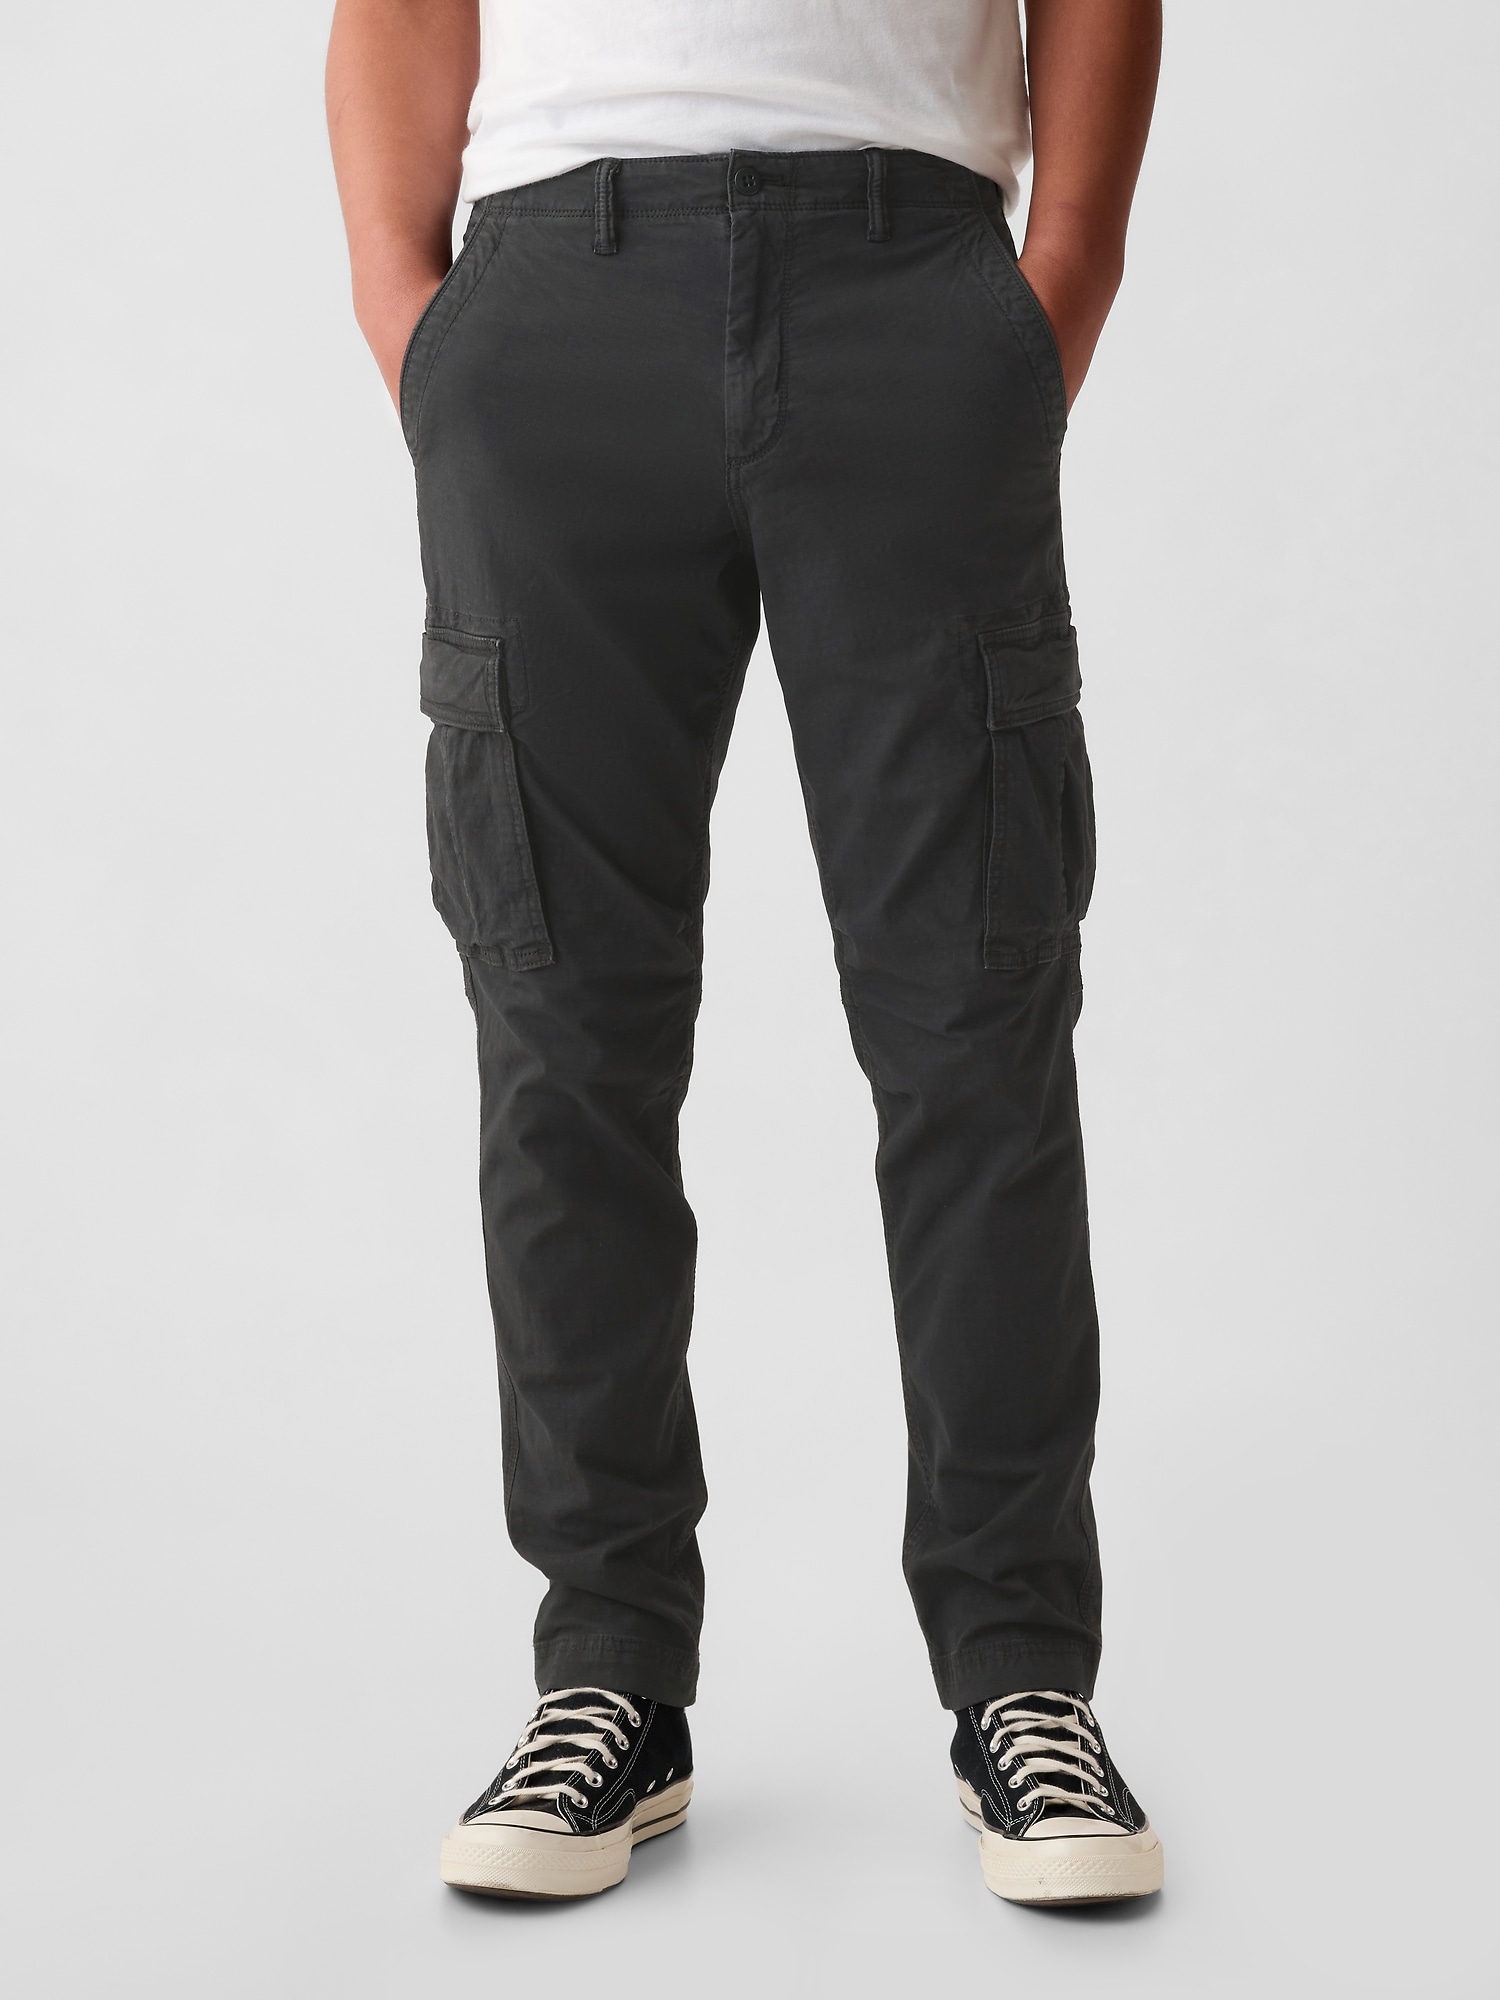 Loose Fit Cargo Pants for Men | Old Navy